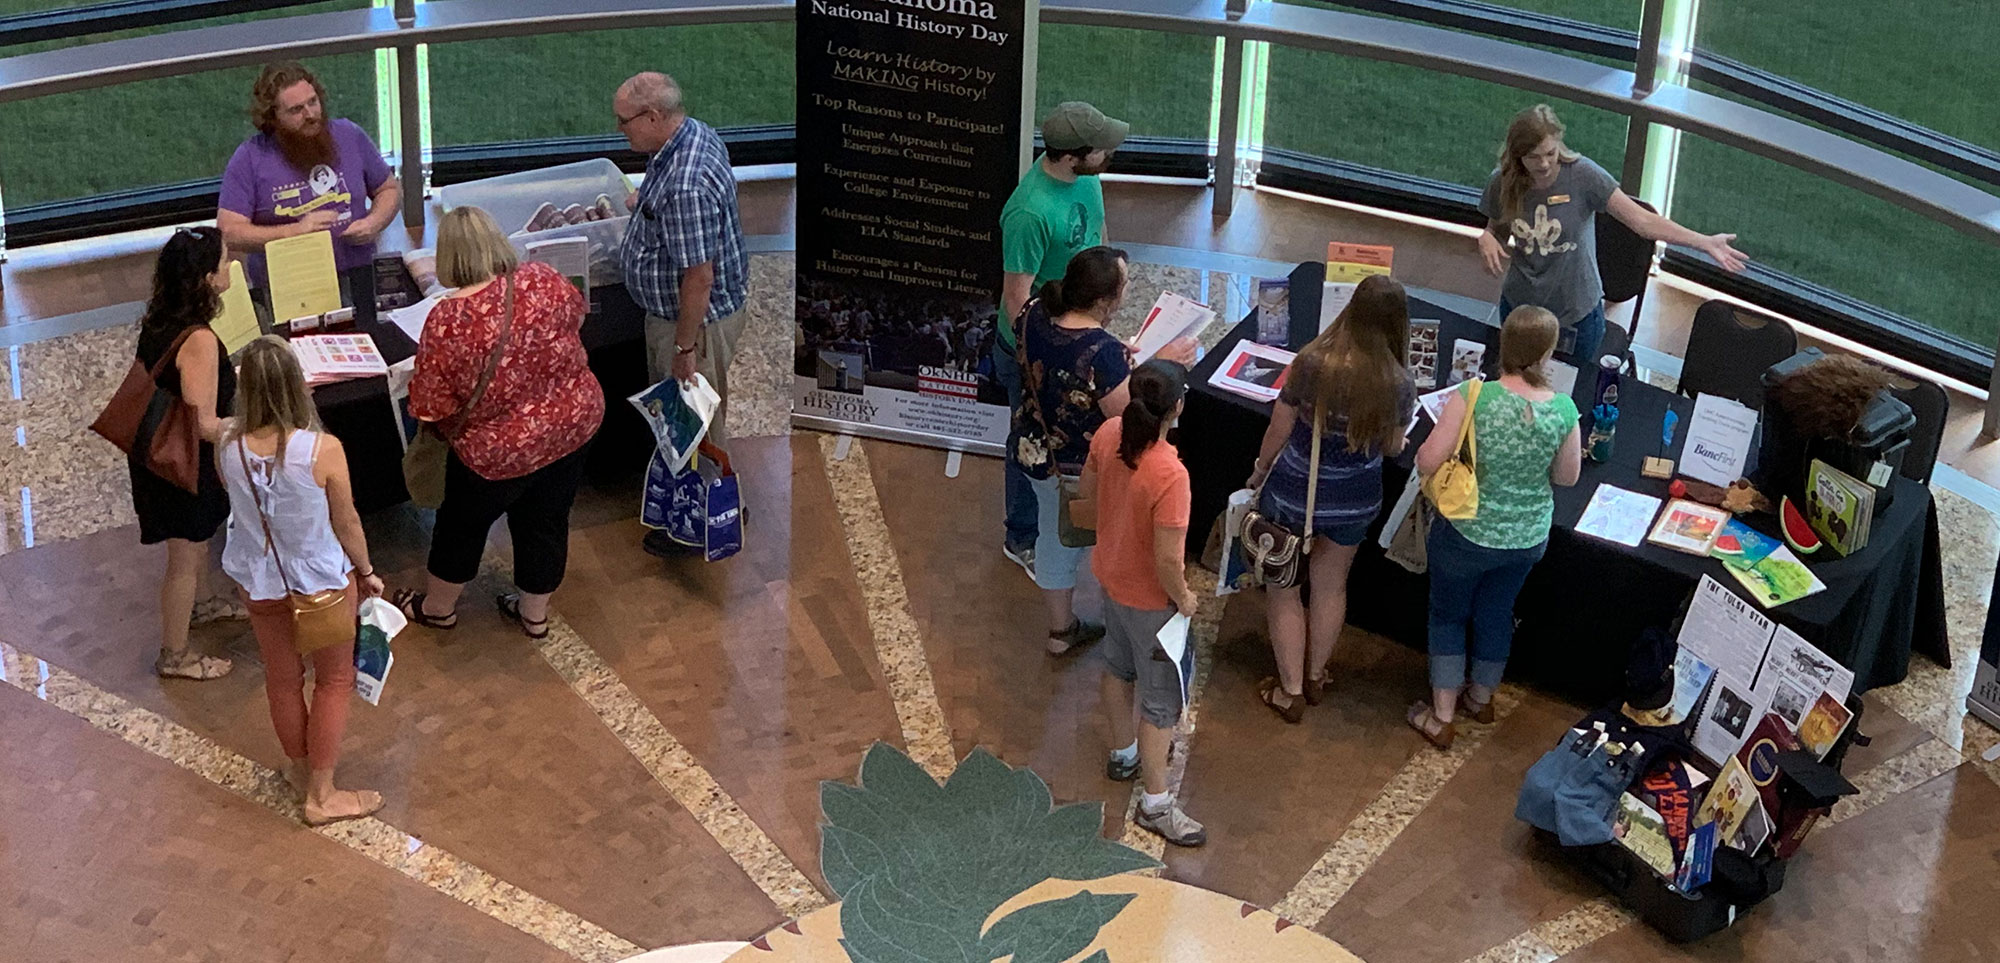 A small crowd of people view History Day booths and speak with History Center staff